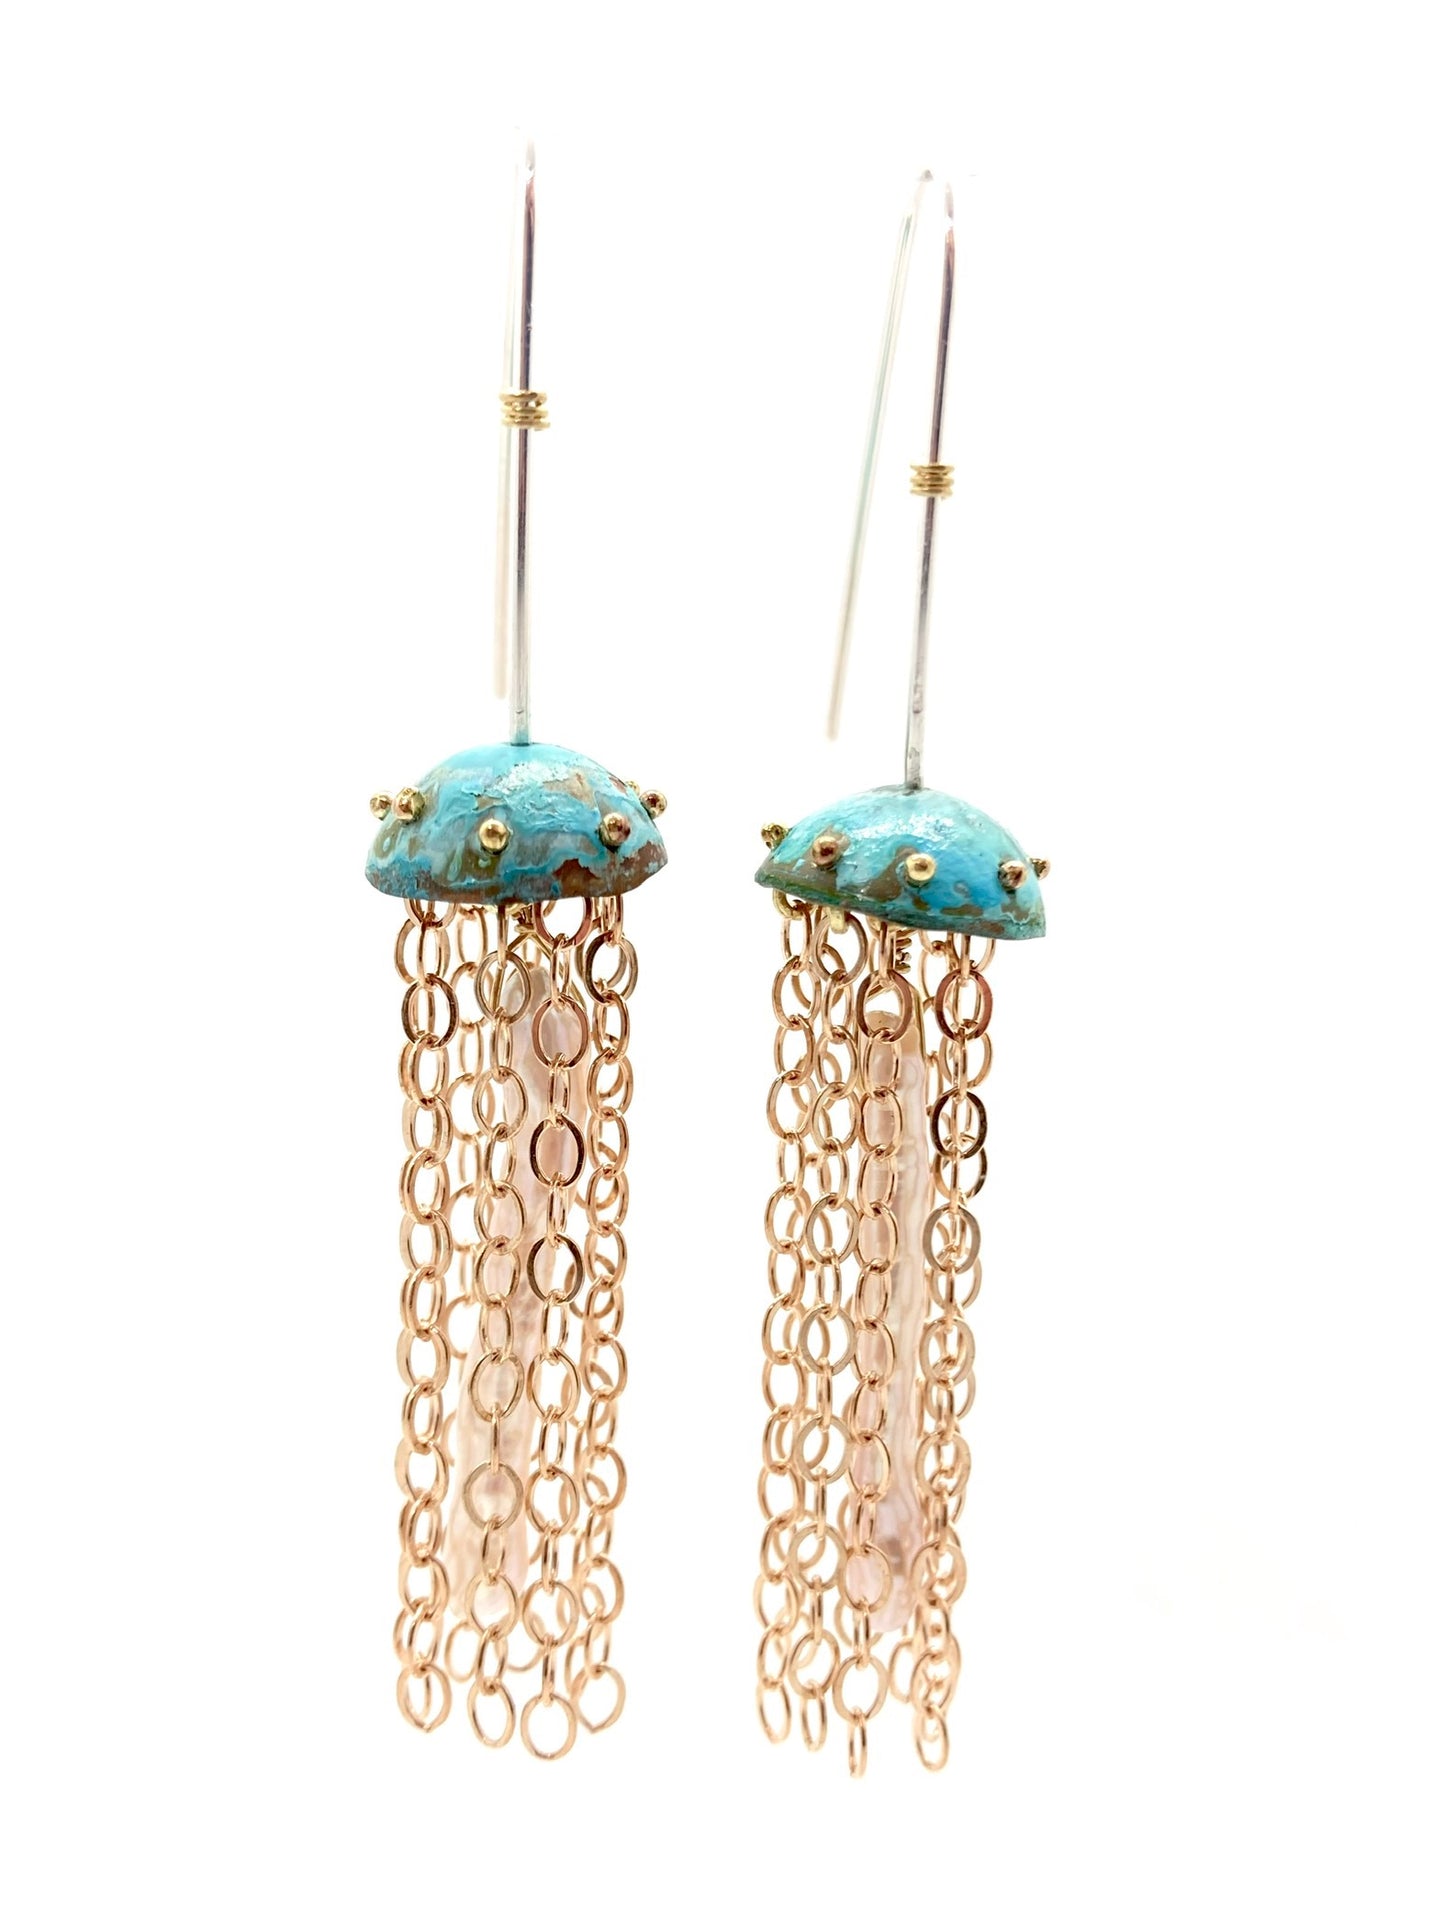 Green Copper Jellyfish Chain Earrings with Pearls and Sterling Silver Earwires